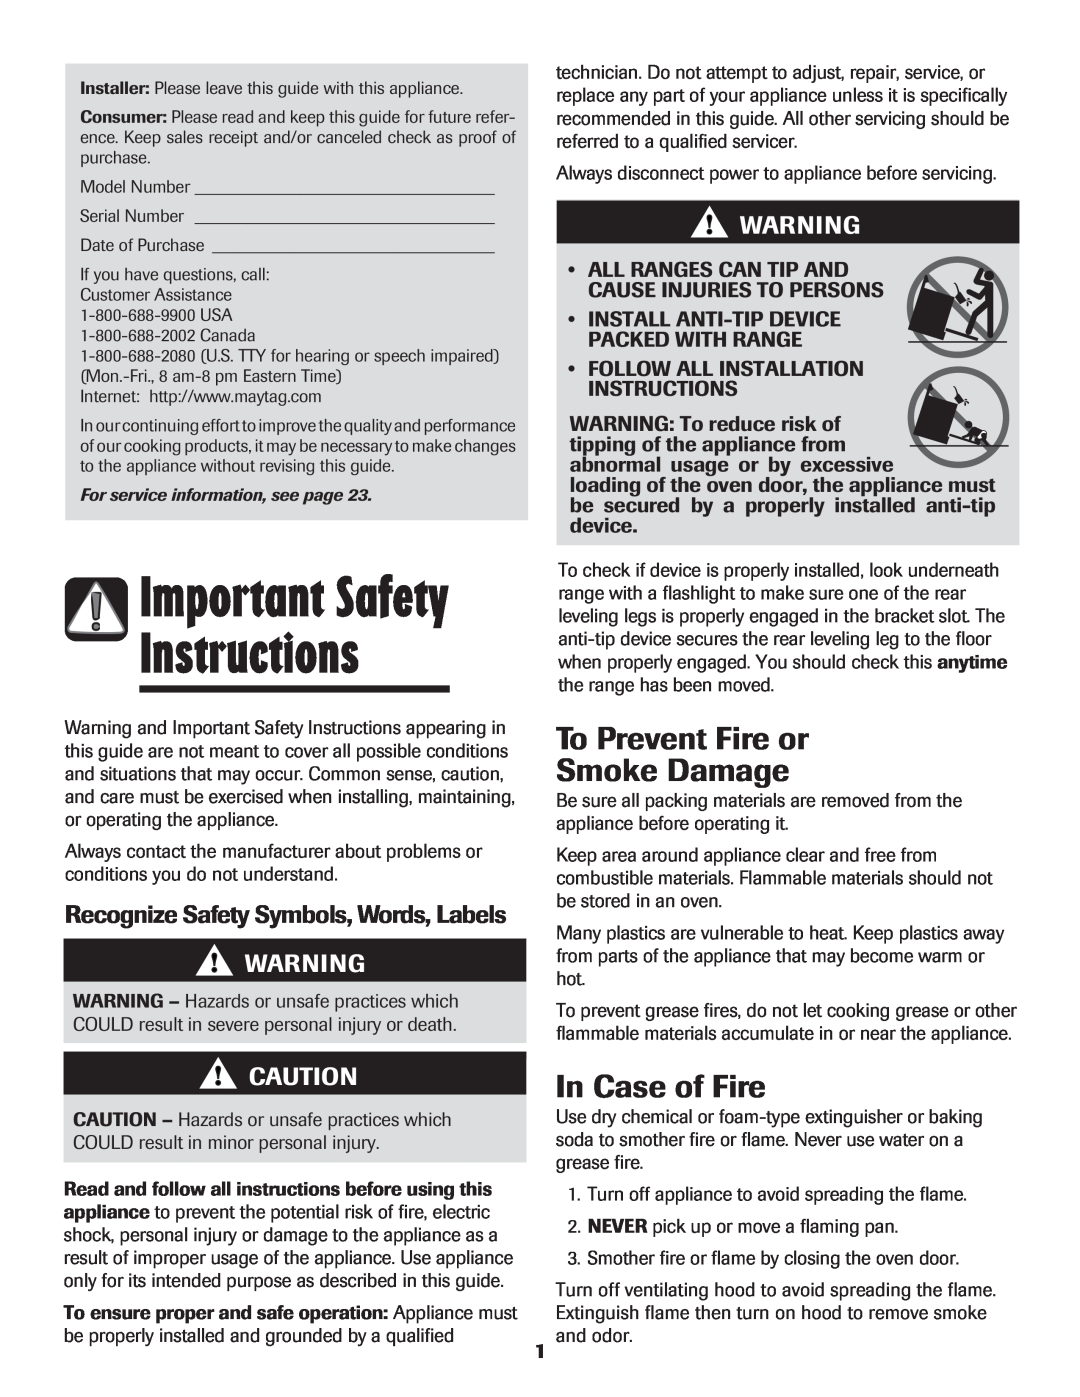 Maytag MES5752BAW manual Instructions, Important Safety, To Prevent Fire or Smoke Damage, In Case of Fire 